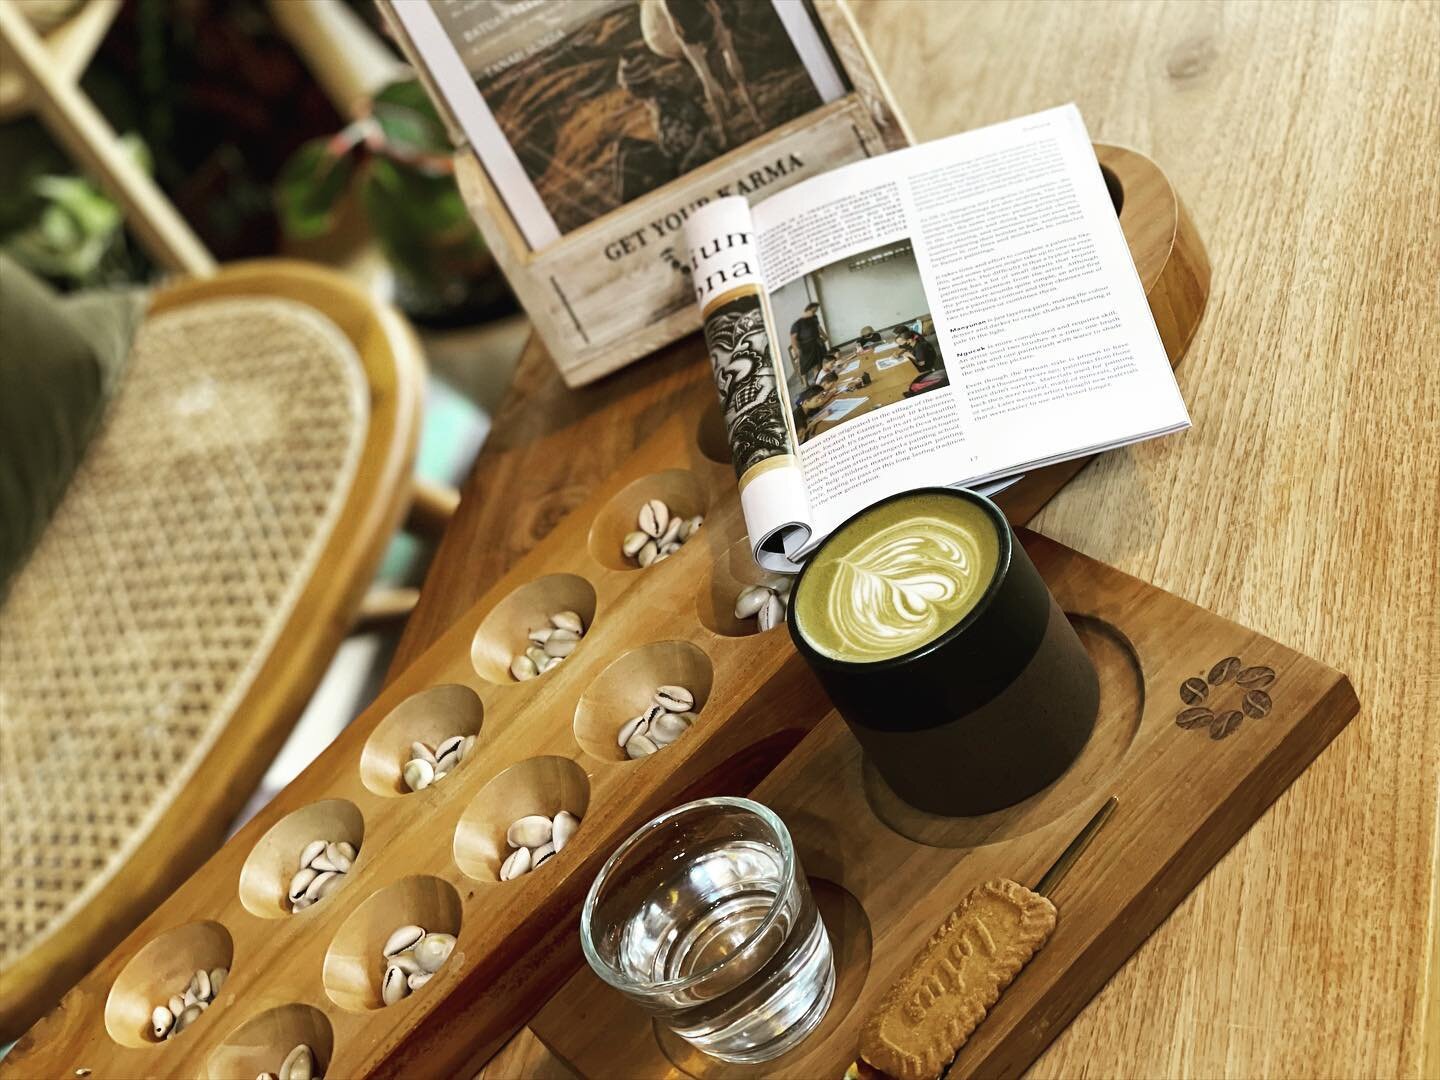 Alone or with friends, you&rsquo;ll always have us and @instantkarma.mag as company at Bloom
Pictured: dirty matcha latte with a traditional game of #congklakkayu 
. . . 
Caf&eacute; Bloom Bali
coffee | tea | pastries
#goodfood #goodmood 
Serving Mon